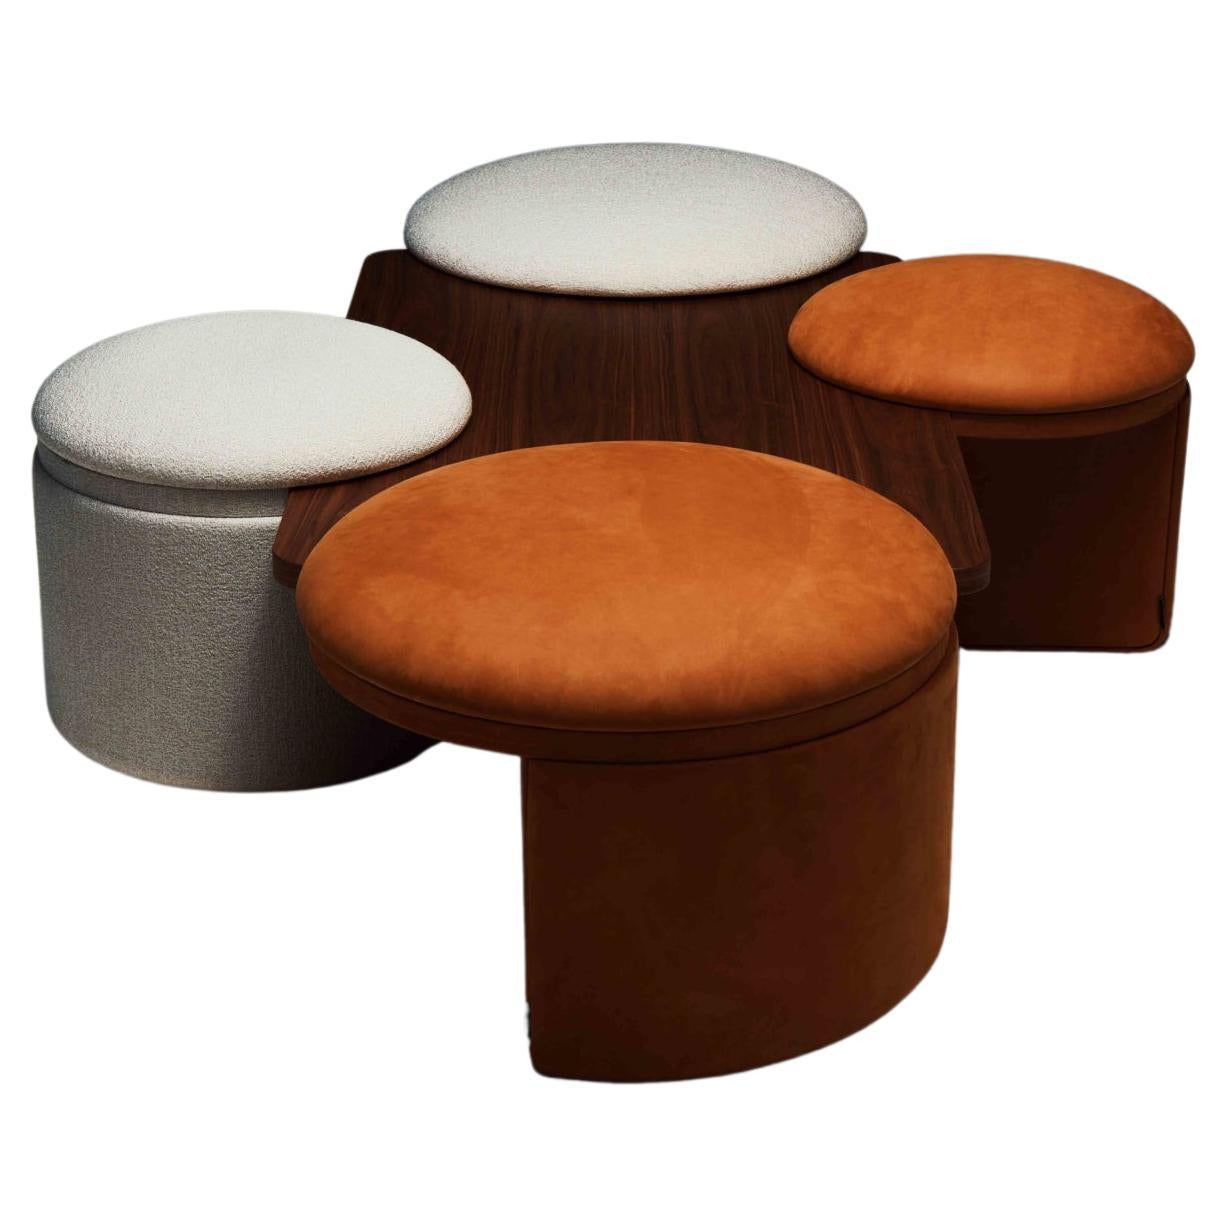 Amazone Composed by 4 Pouf by Atelier oï For Sale